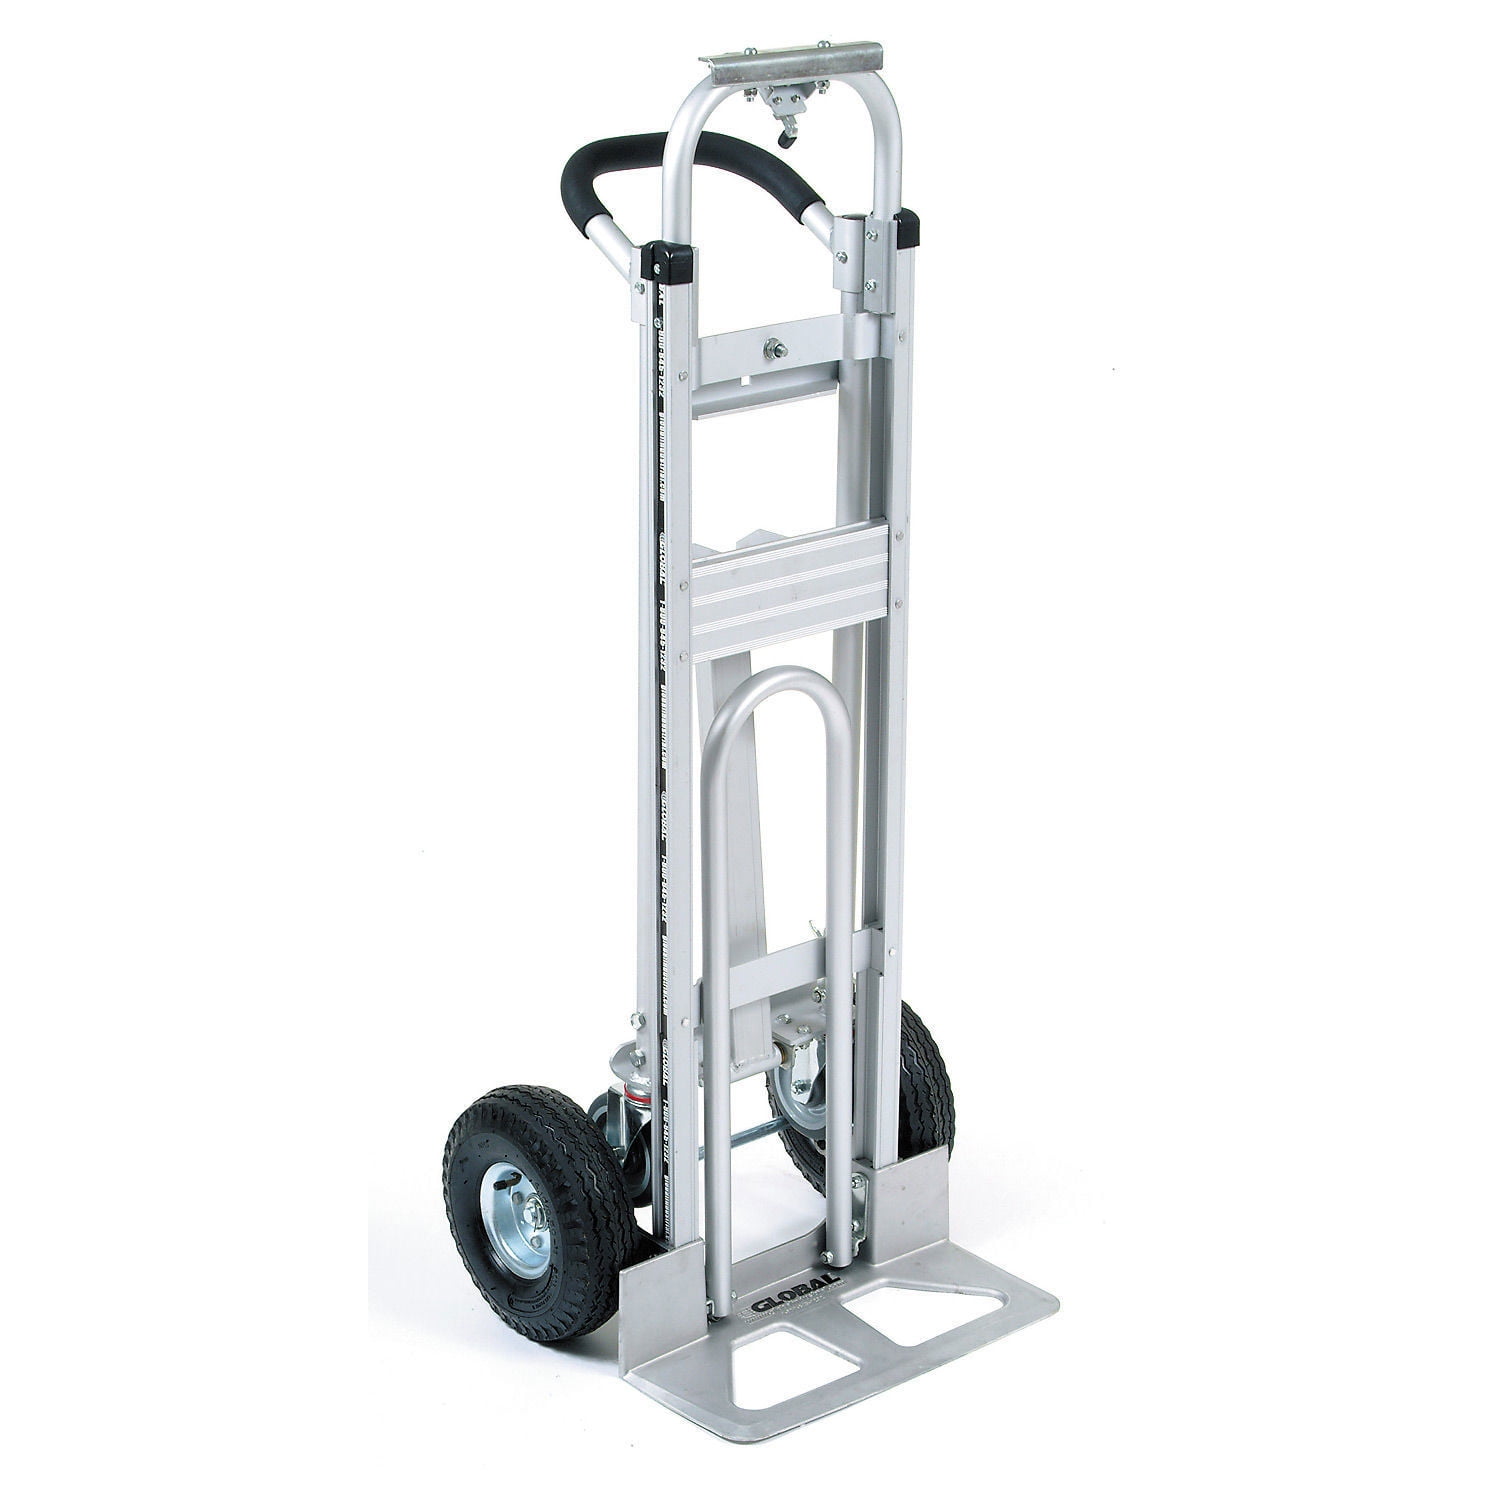 Tyke Supply Aluminum Stair Climber Hand Truck With Extra Tall Handle HS-3 